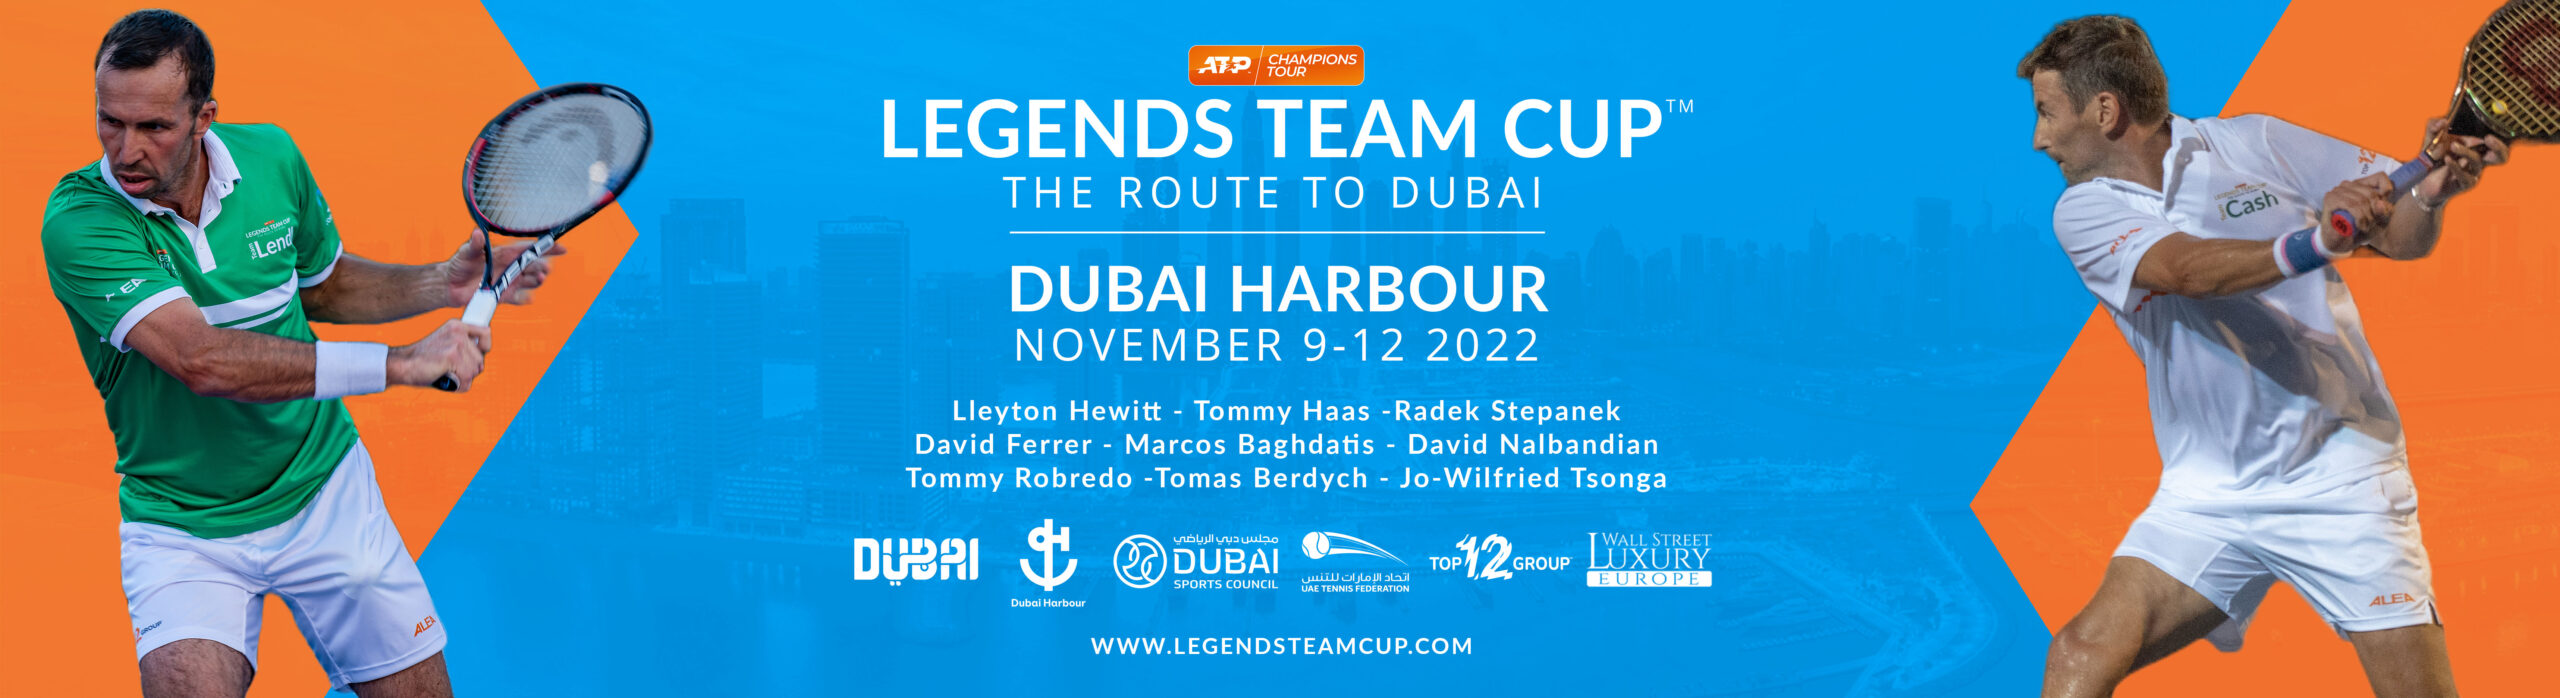 Tennis World Stars, Superyachts and a Spectacular Venue. The Legends Are on Their Way to Dubai